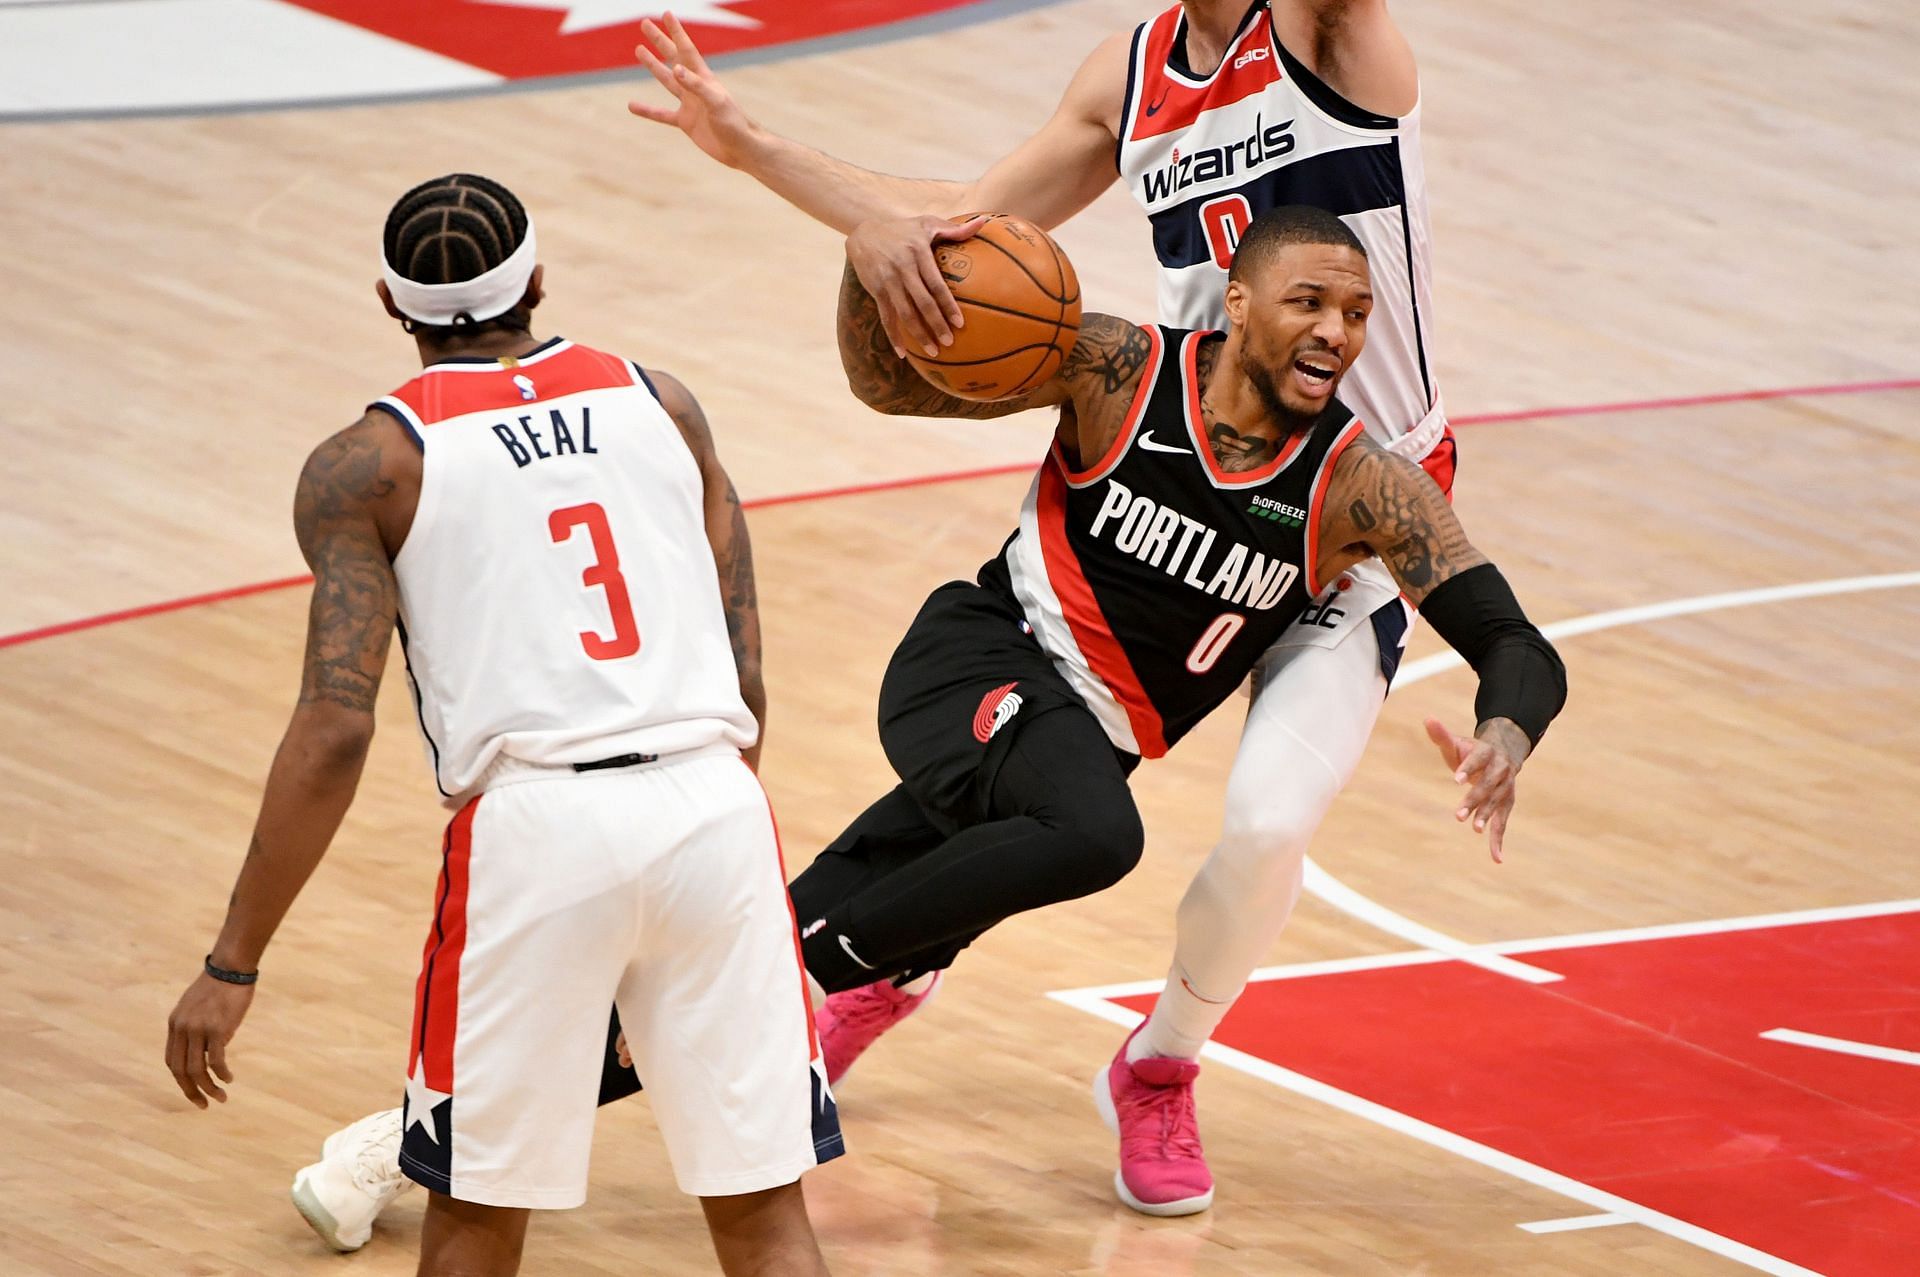 Bradley Beal and Damian Lillard could be targets for the Miami Heat this offseason.